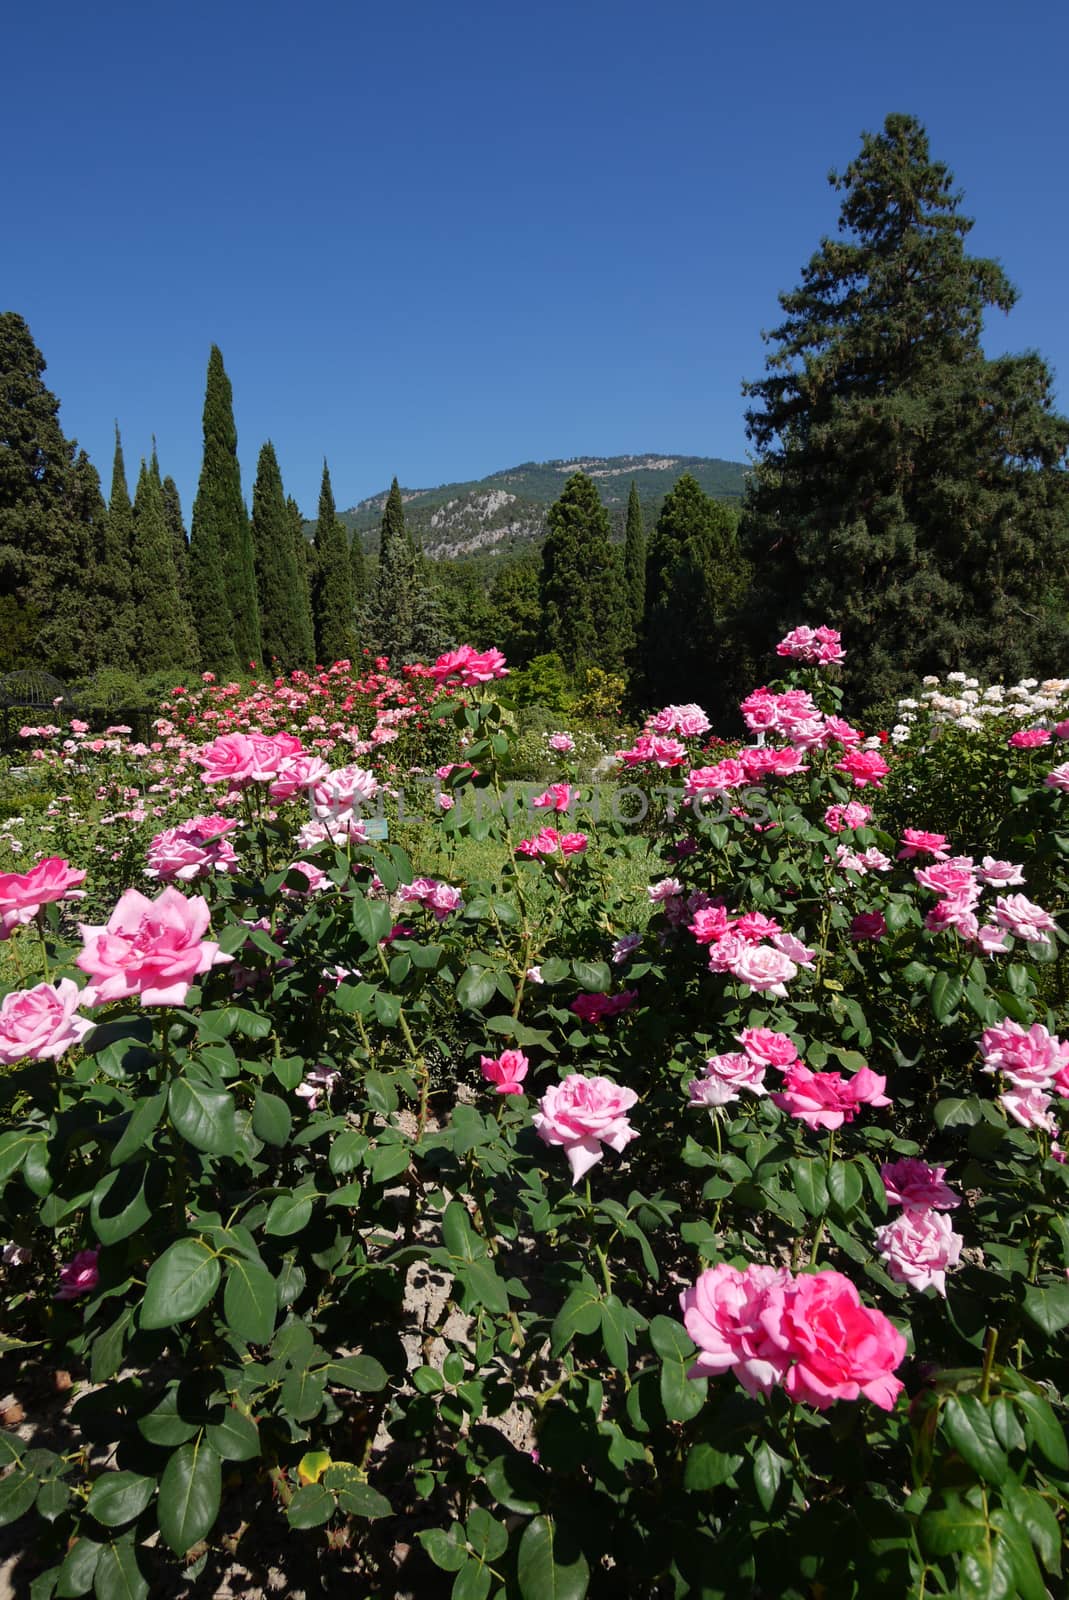 A magnificent glade with beautiful bushes of luxurious roses growing among the lush fir trees with a beautiful view of the mountains and the blue sky. by Adamchuk